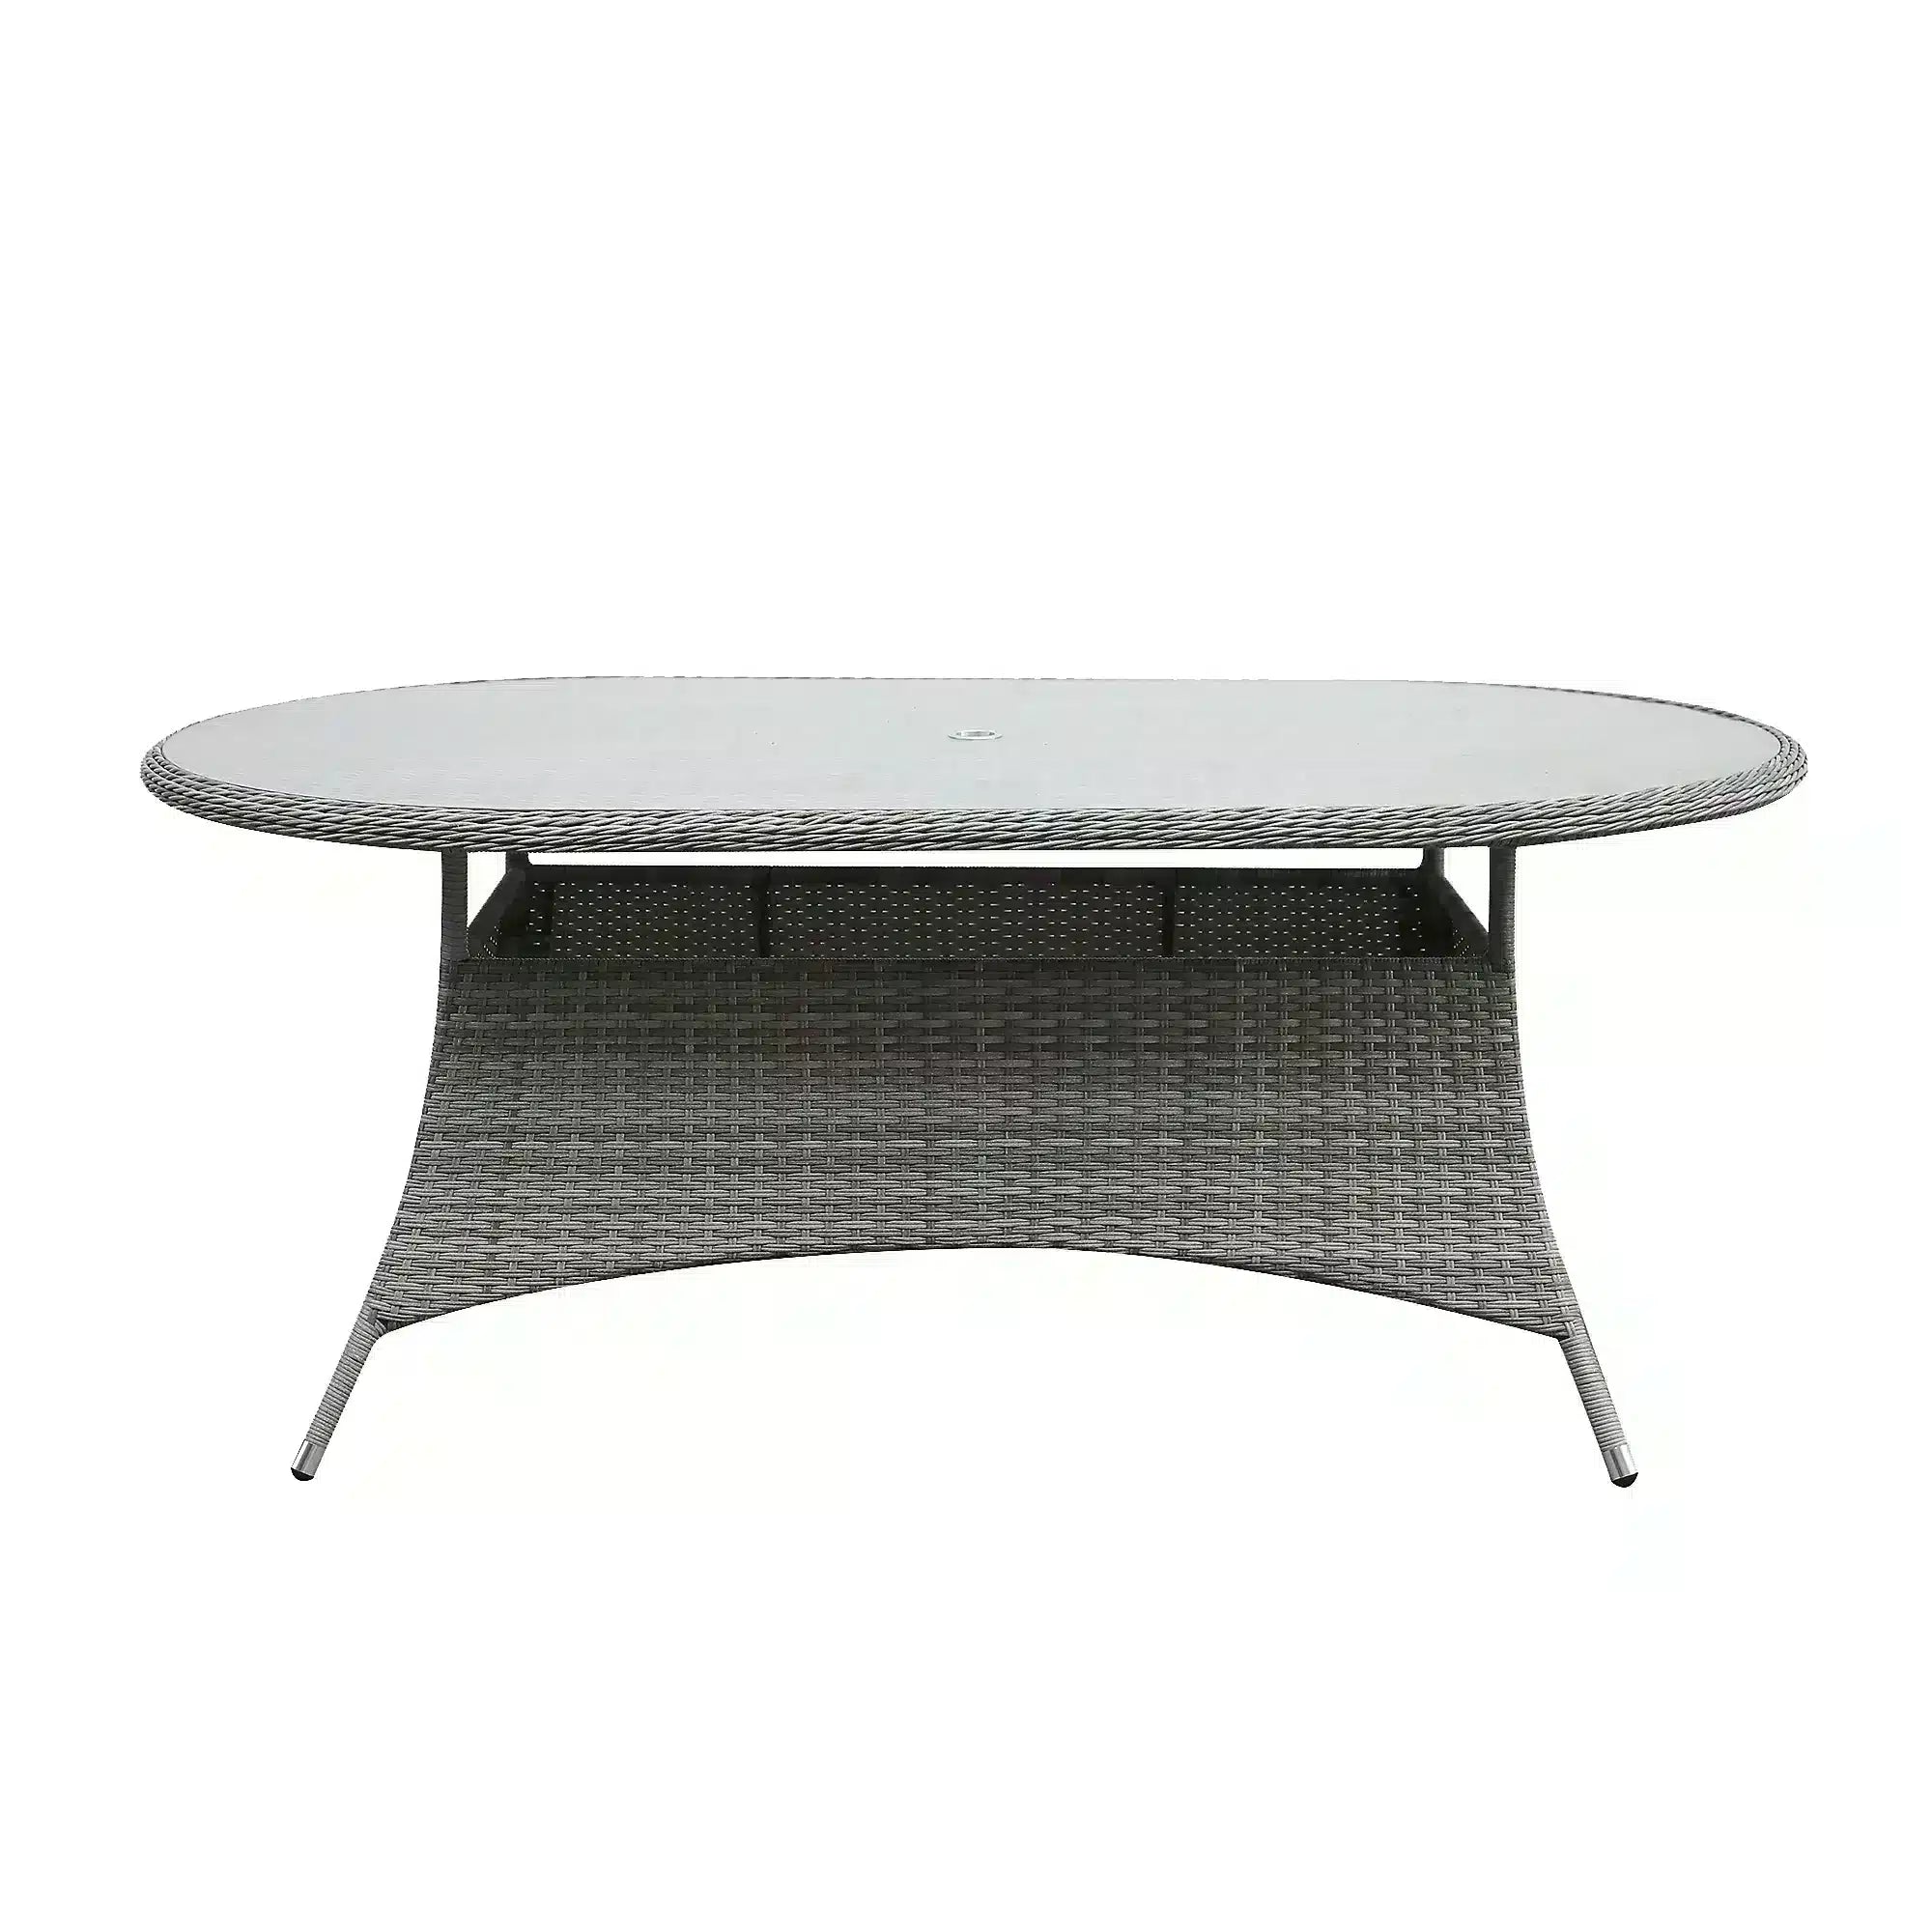 GoodHome Hamilton Rattan effect 6 seater Fixed Dining table – Rattan Table - No Glass Top 2596